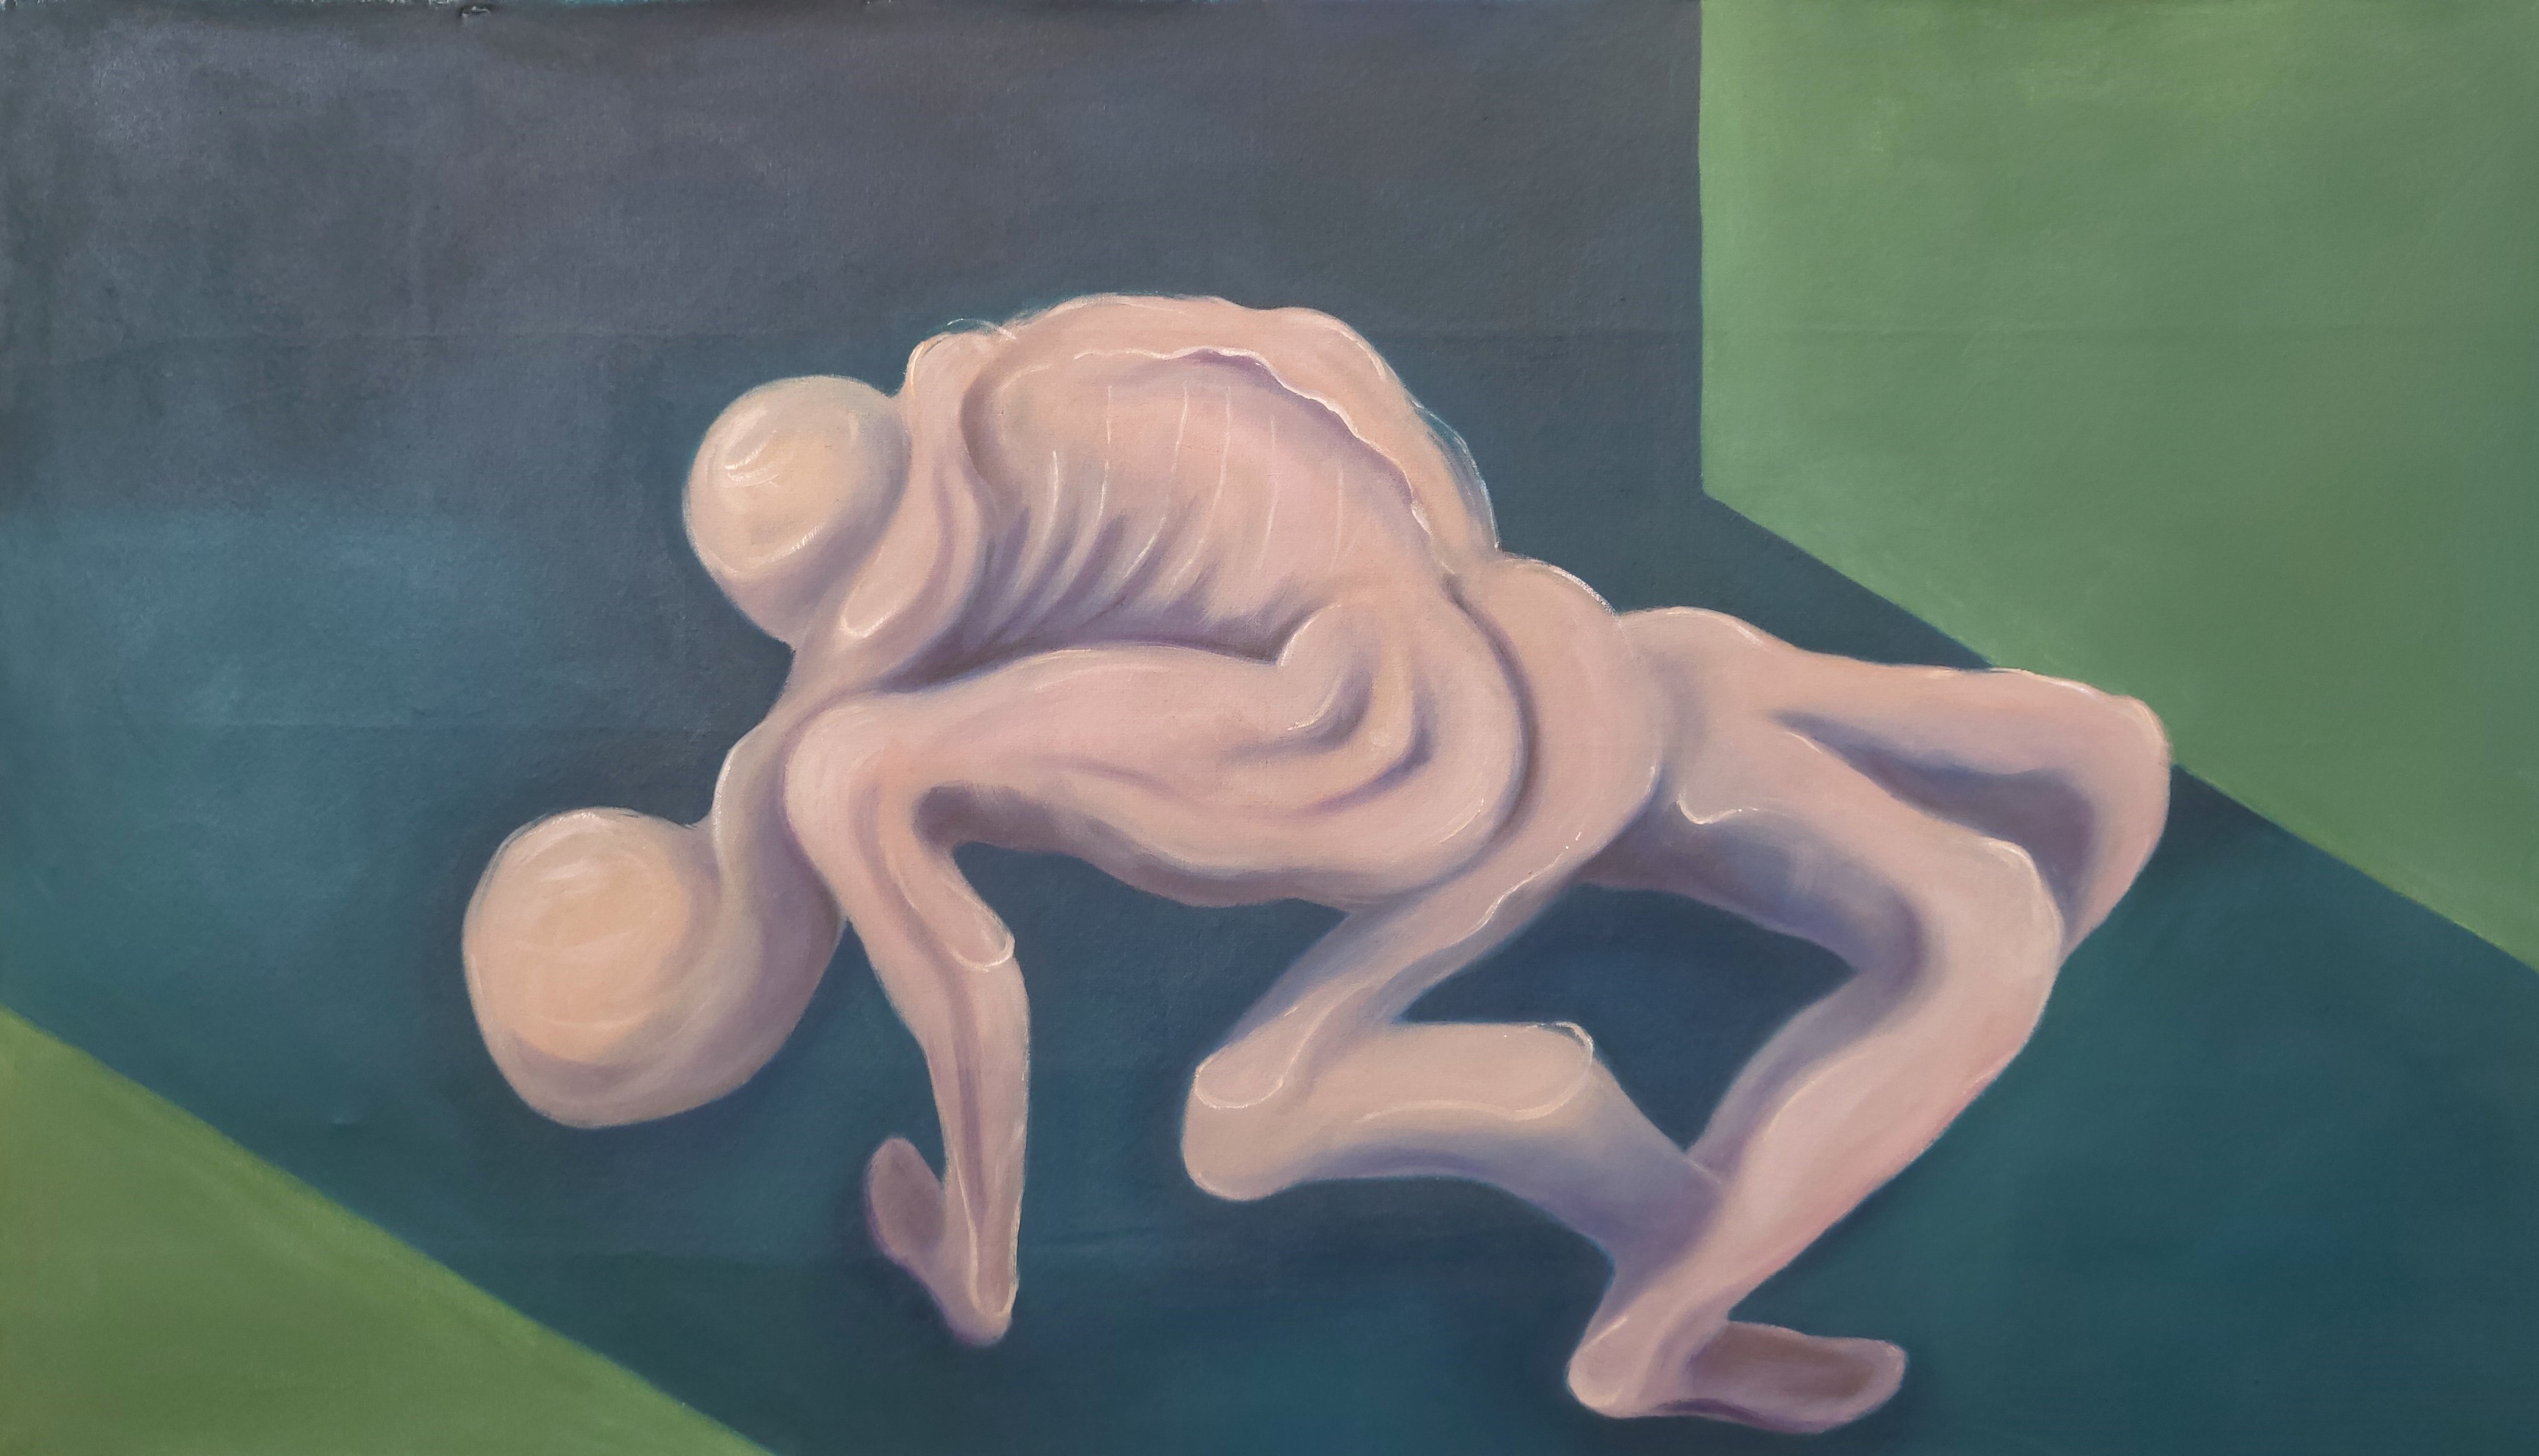 An oil painting by Elena Genovese shows two figures merging together in a flat liminal space.